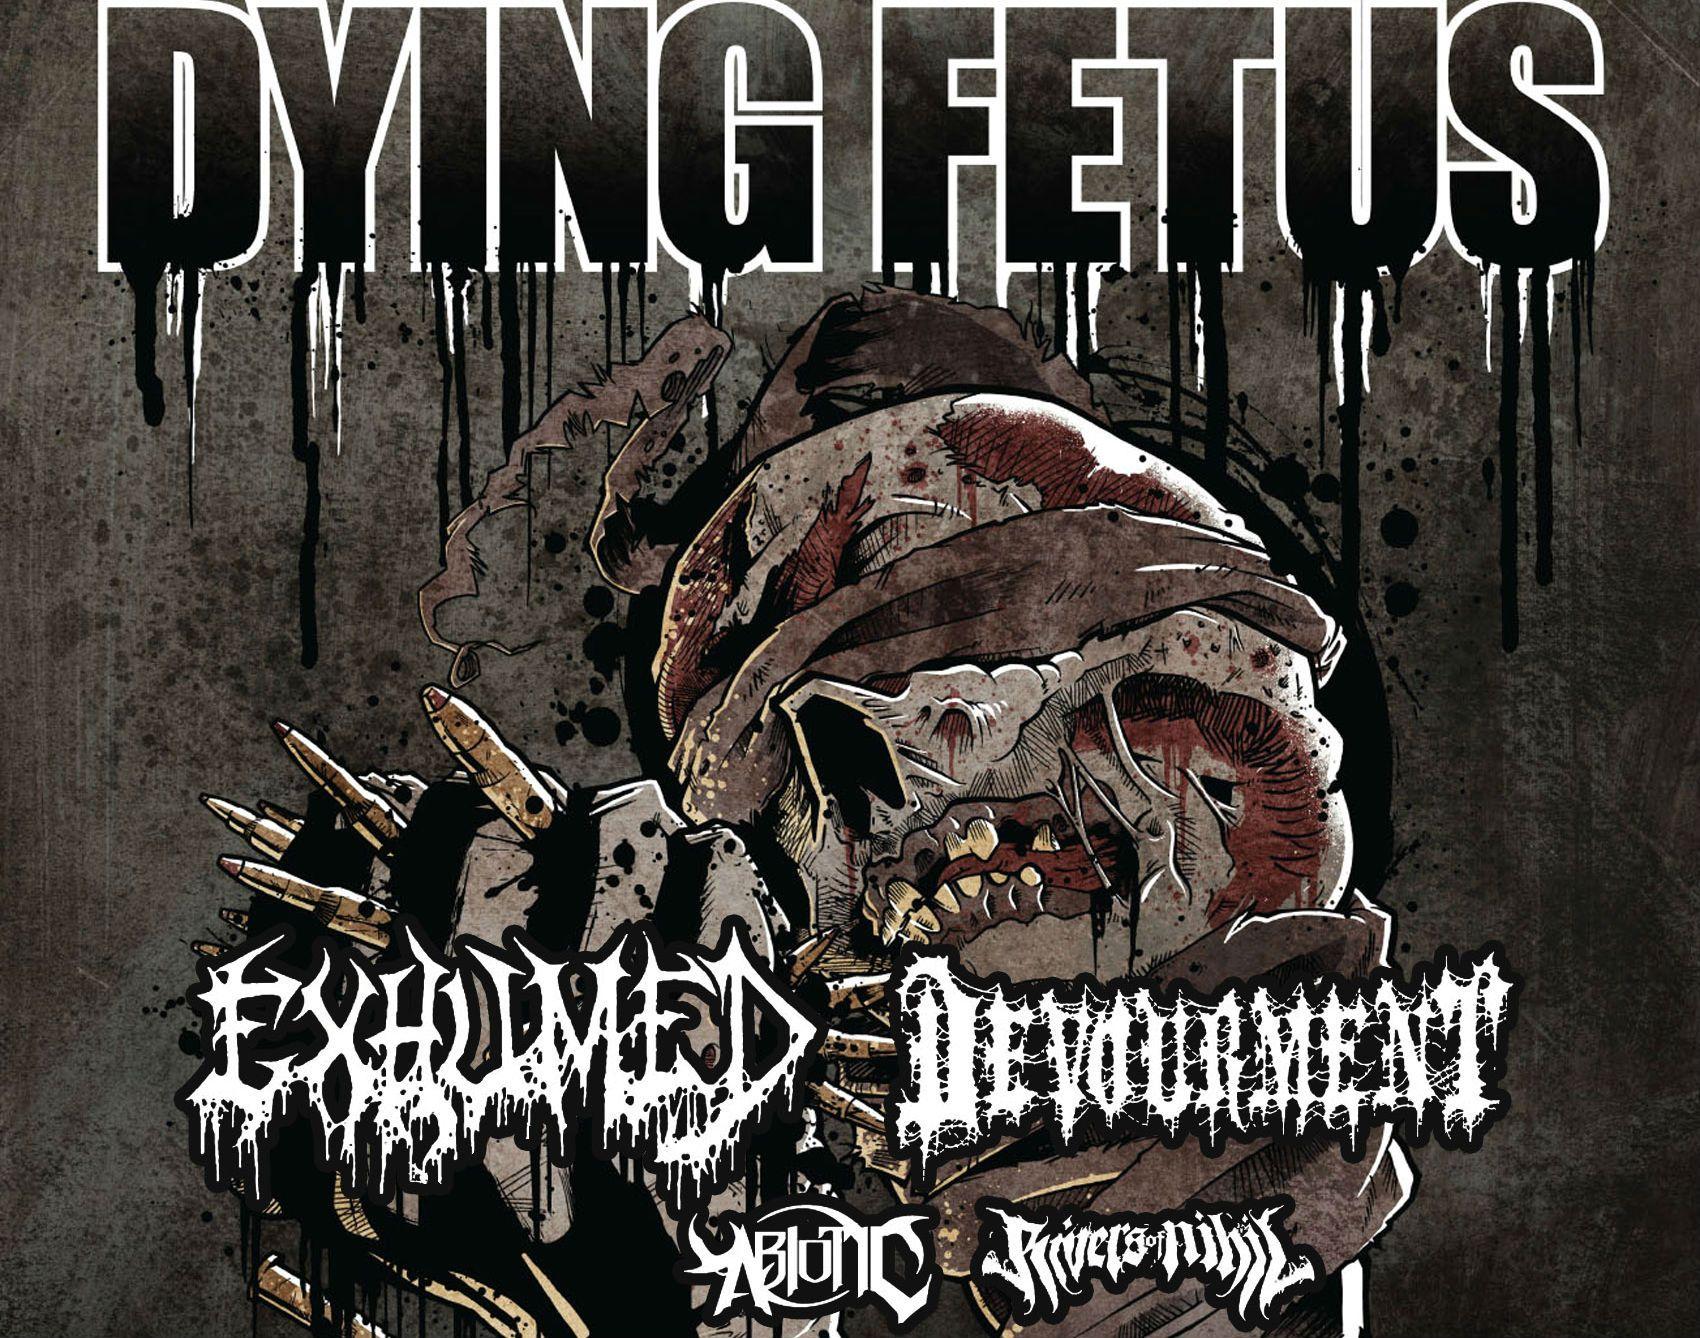 DYING FETUS death metal heavy concert poster ht wallpaper